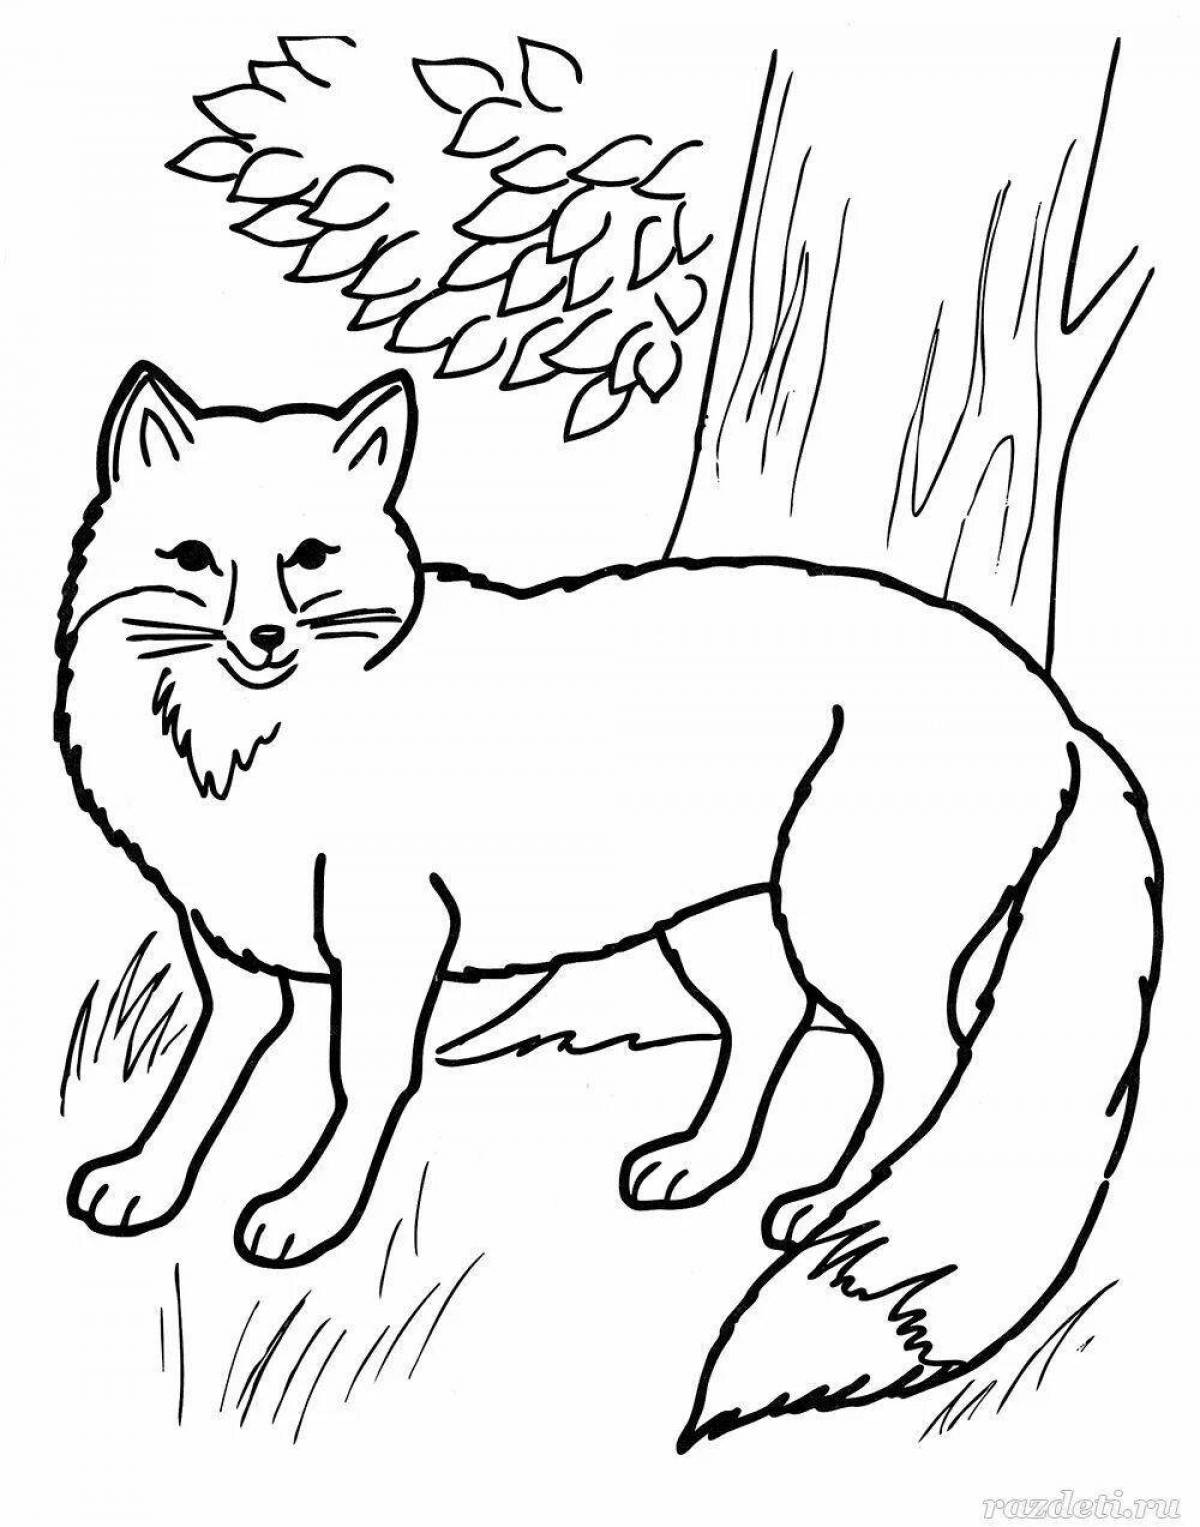 Adorable forest animal coloring page for 4-5 year olds